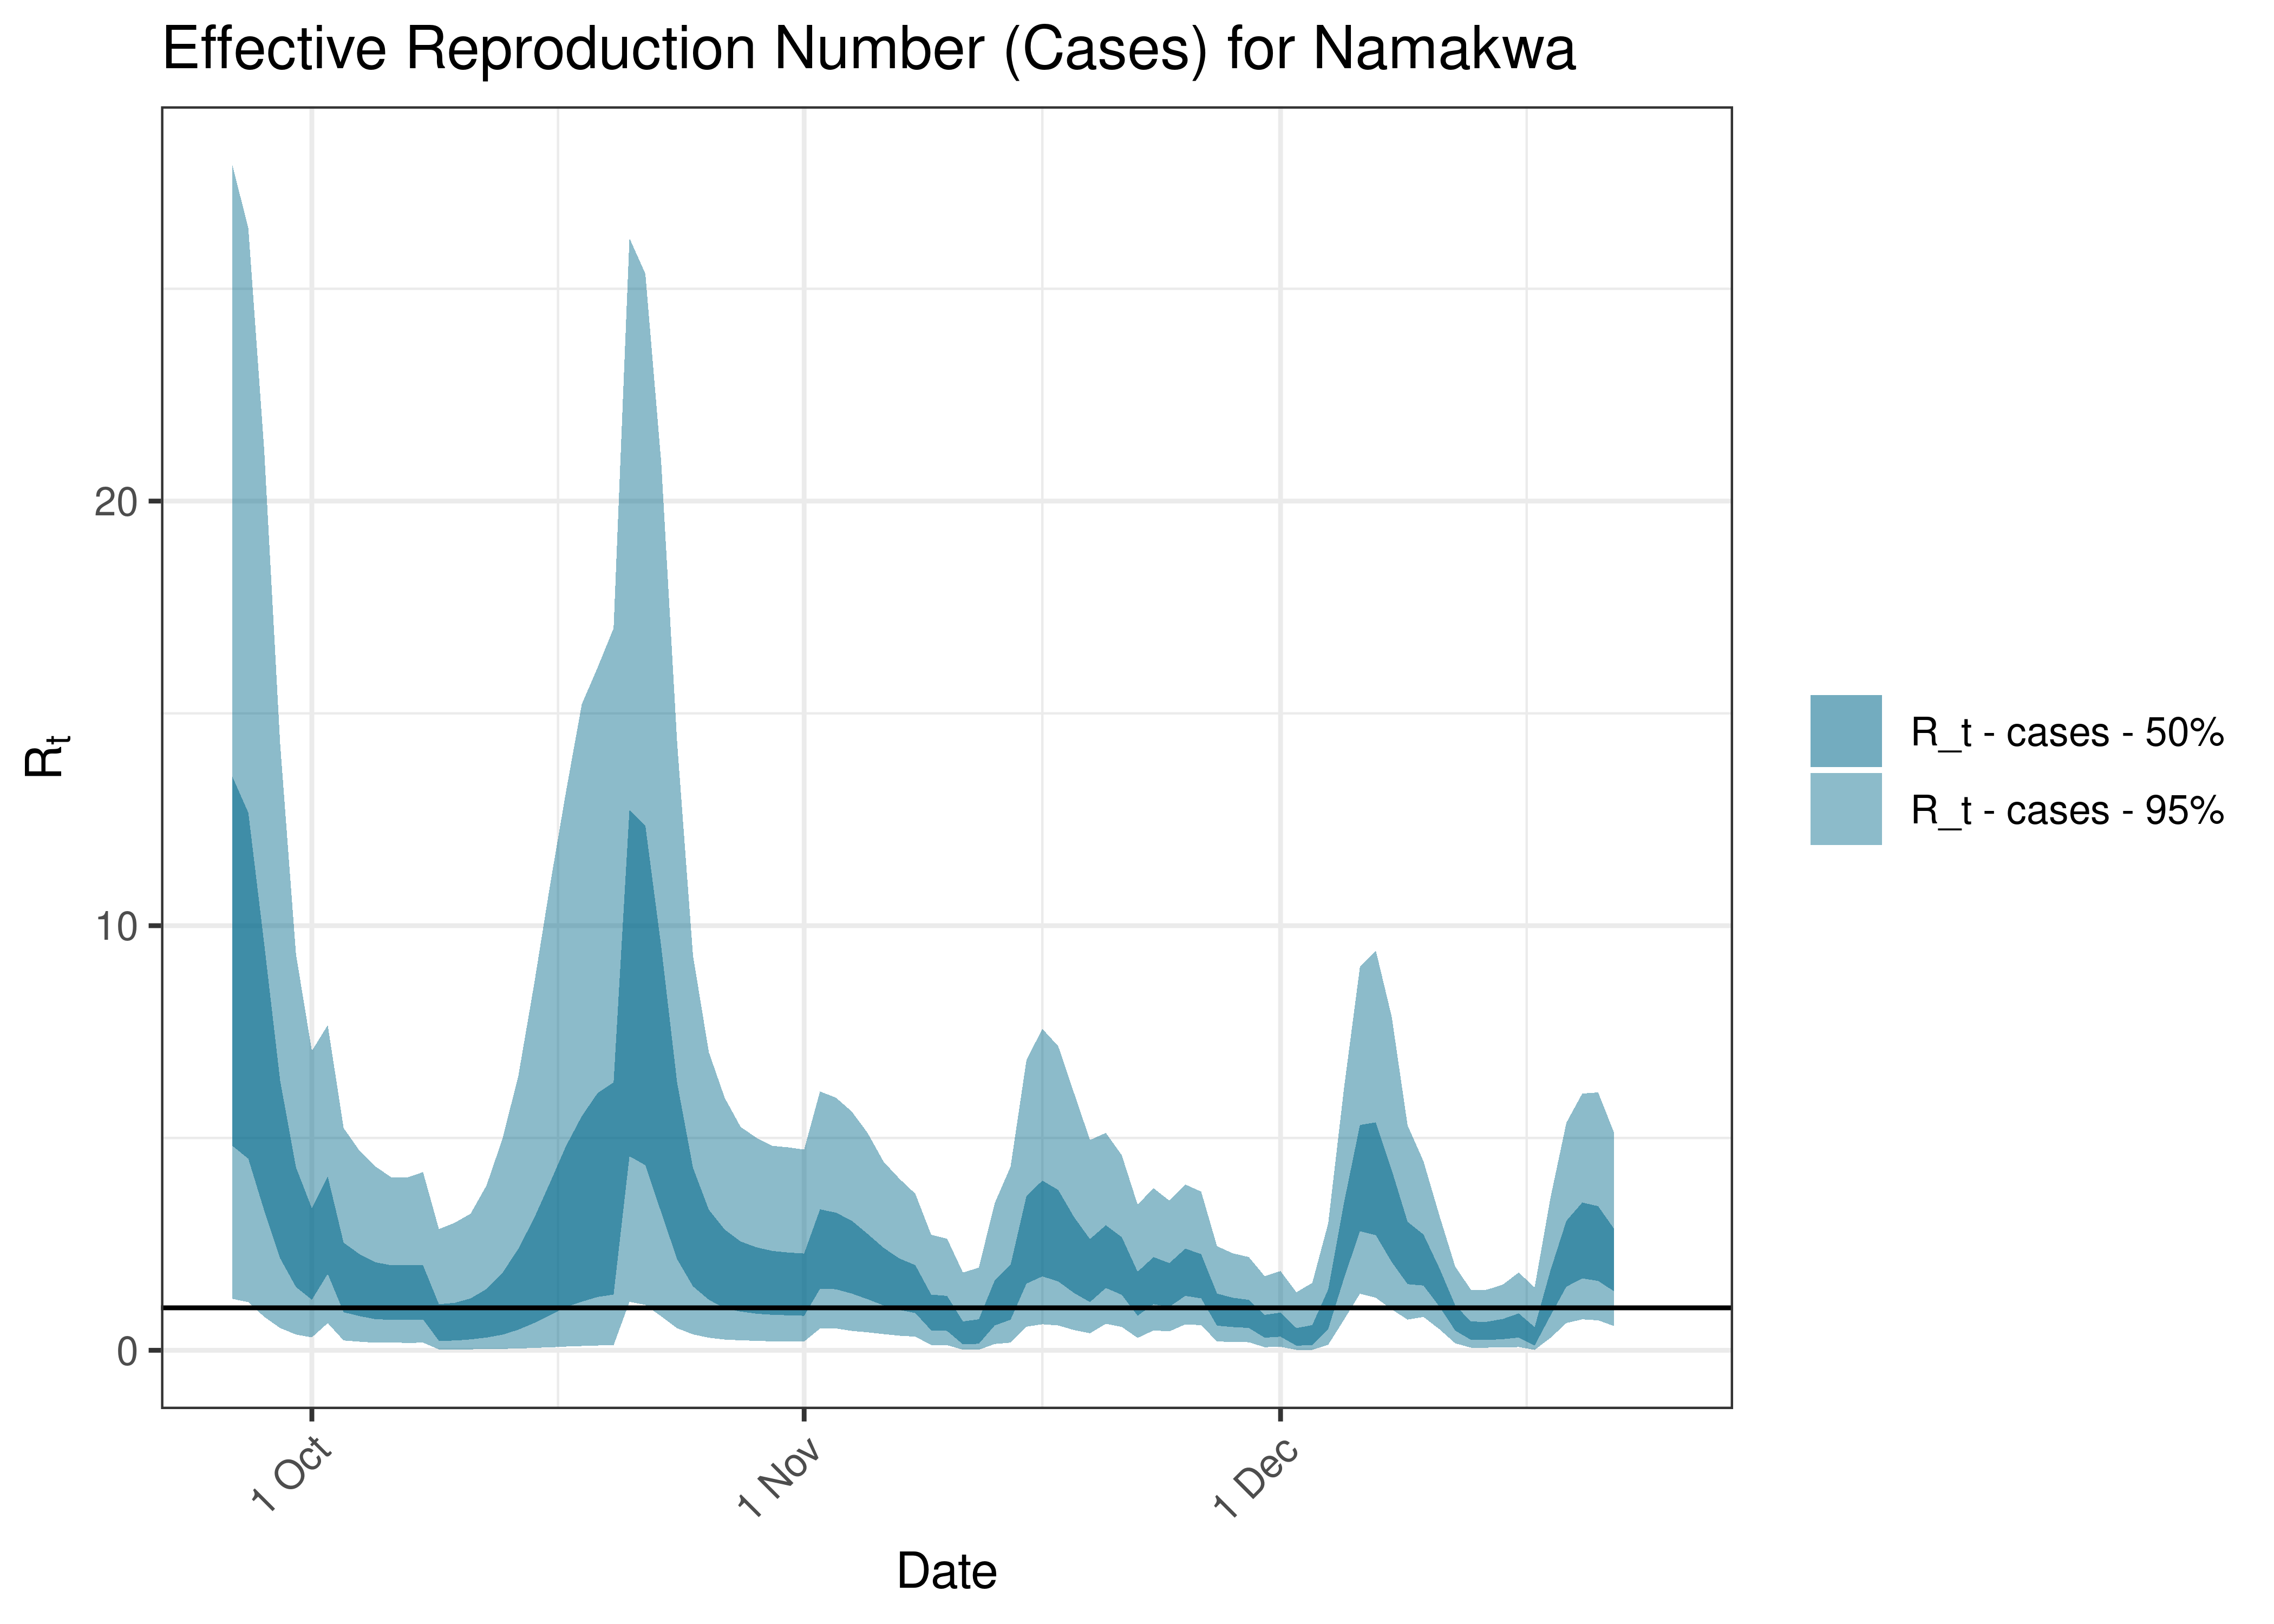 Estimated Effective Reproduction Number Based on Cases for Namakwa over last 90 days